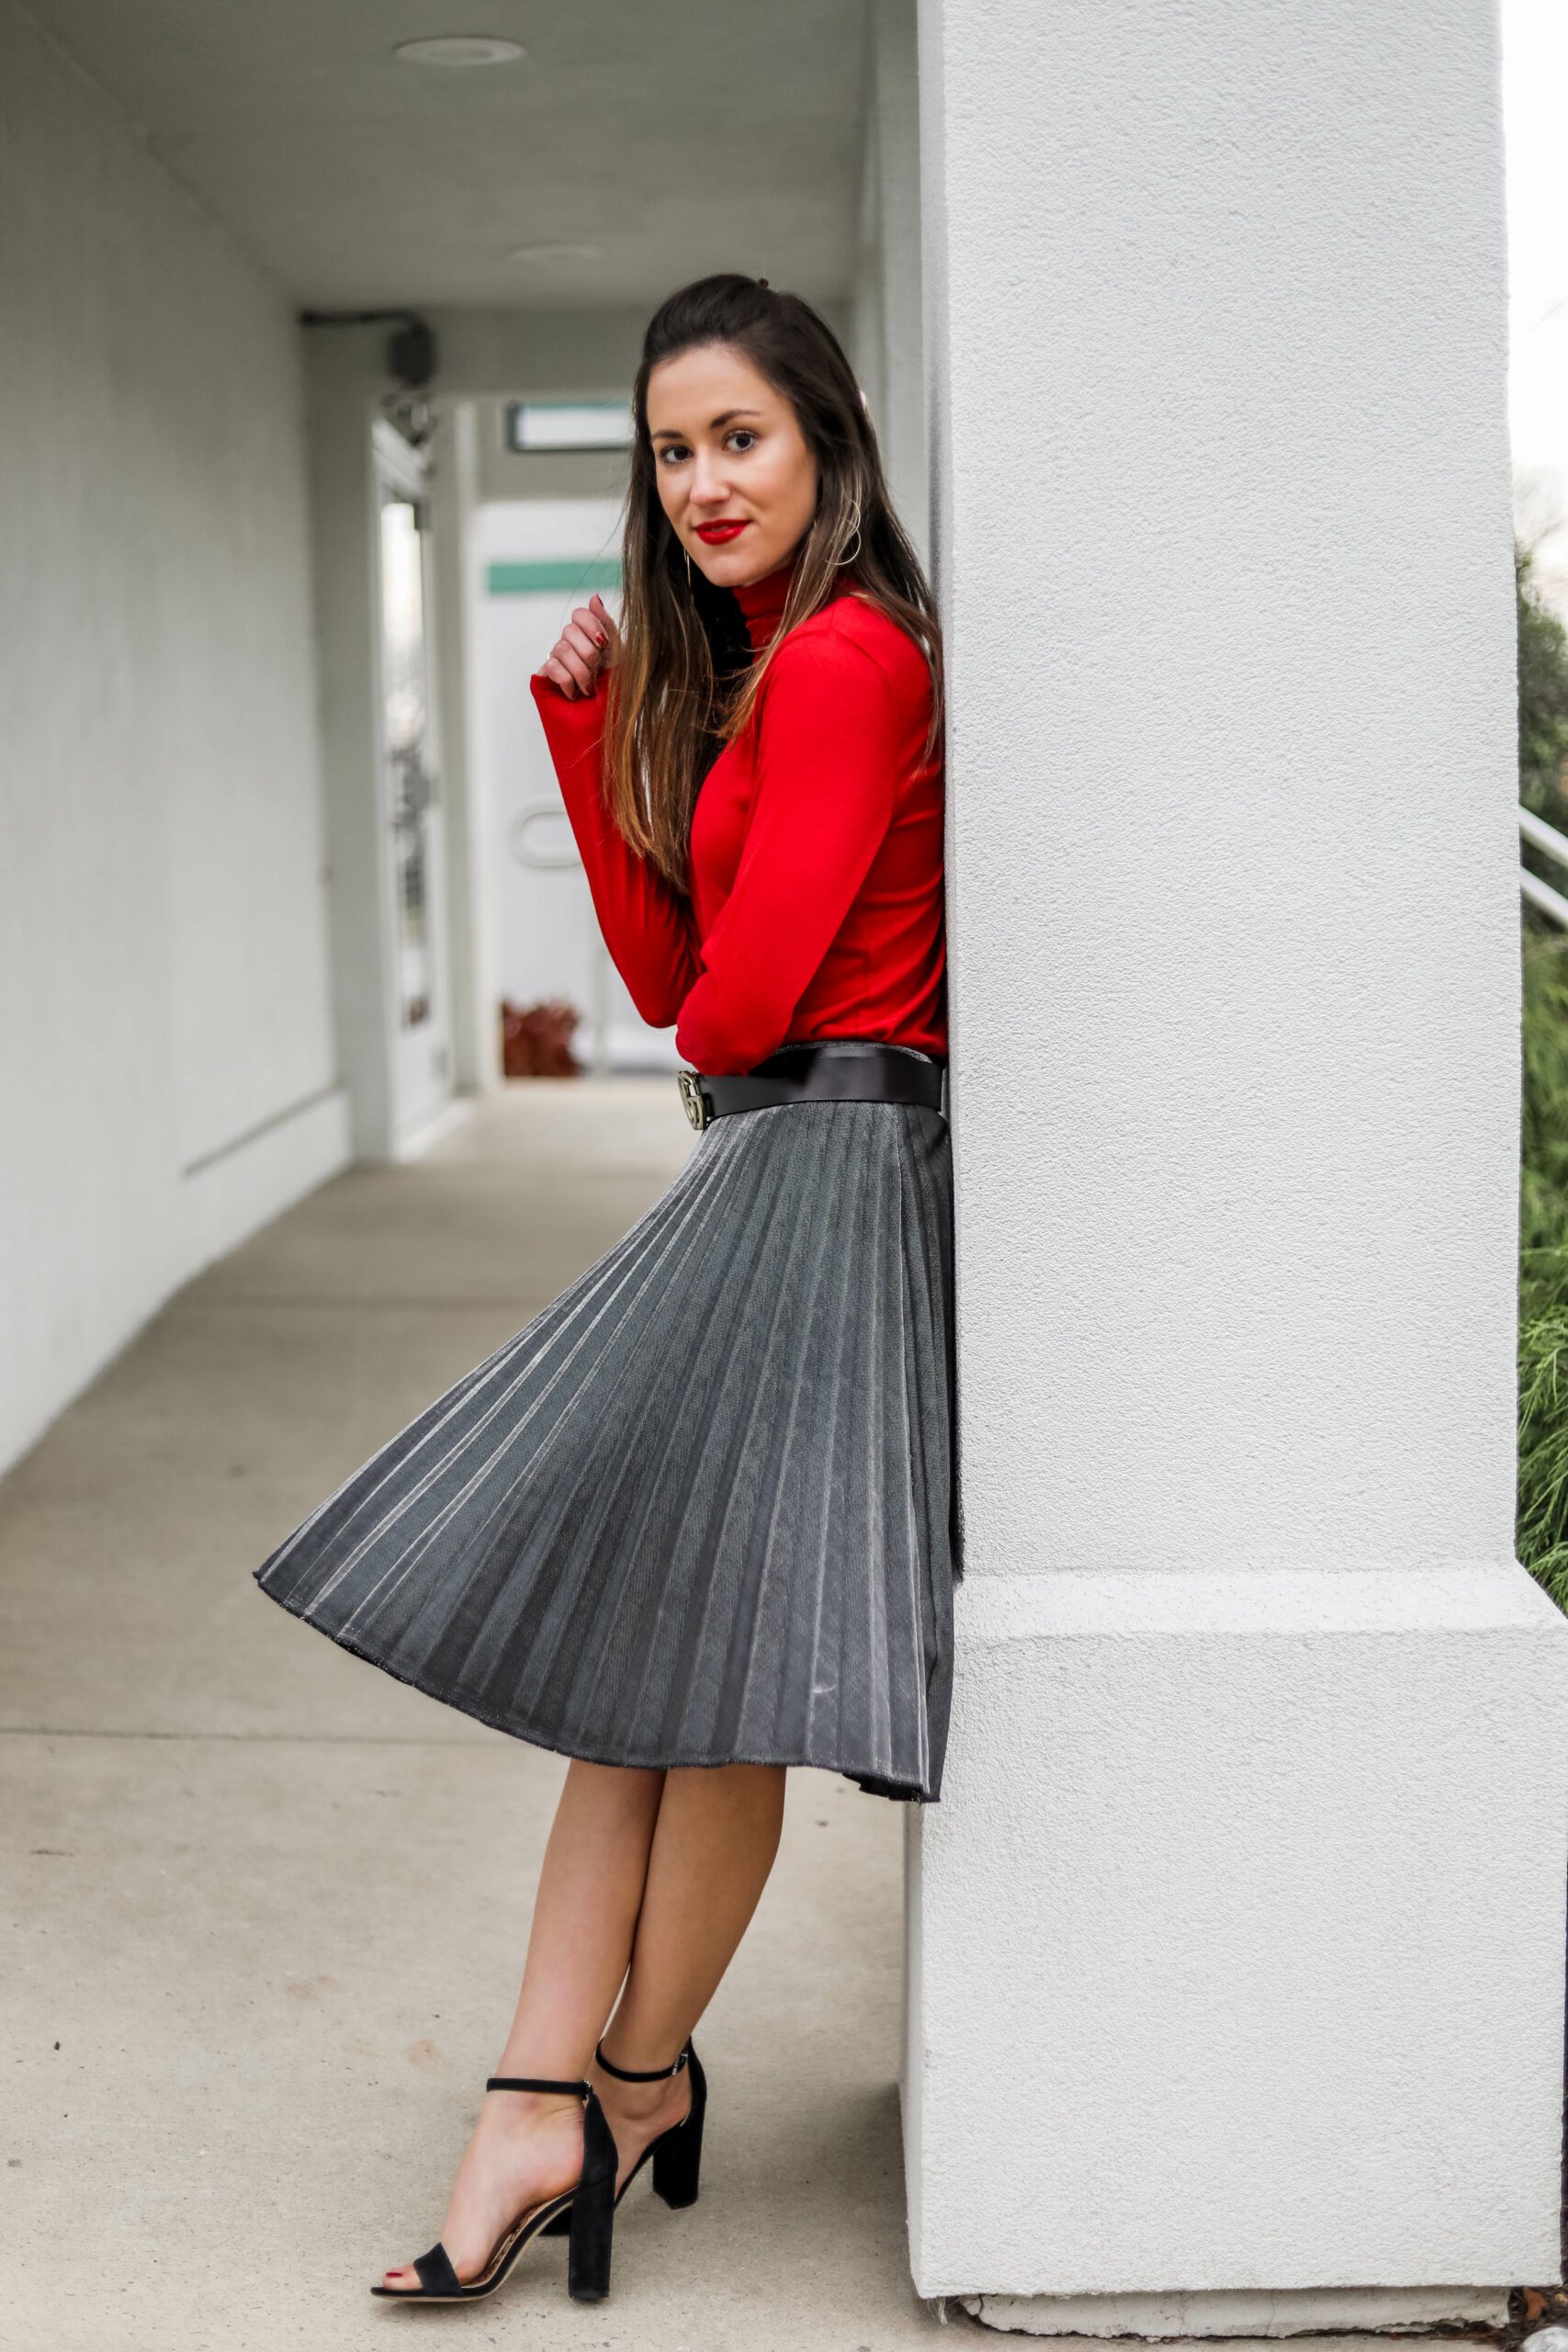 AFFORDABLE HOLIDAY LOOK - Pleated Skirt Outfit from Target on Coming Up Roses